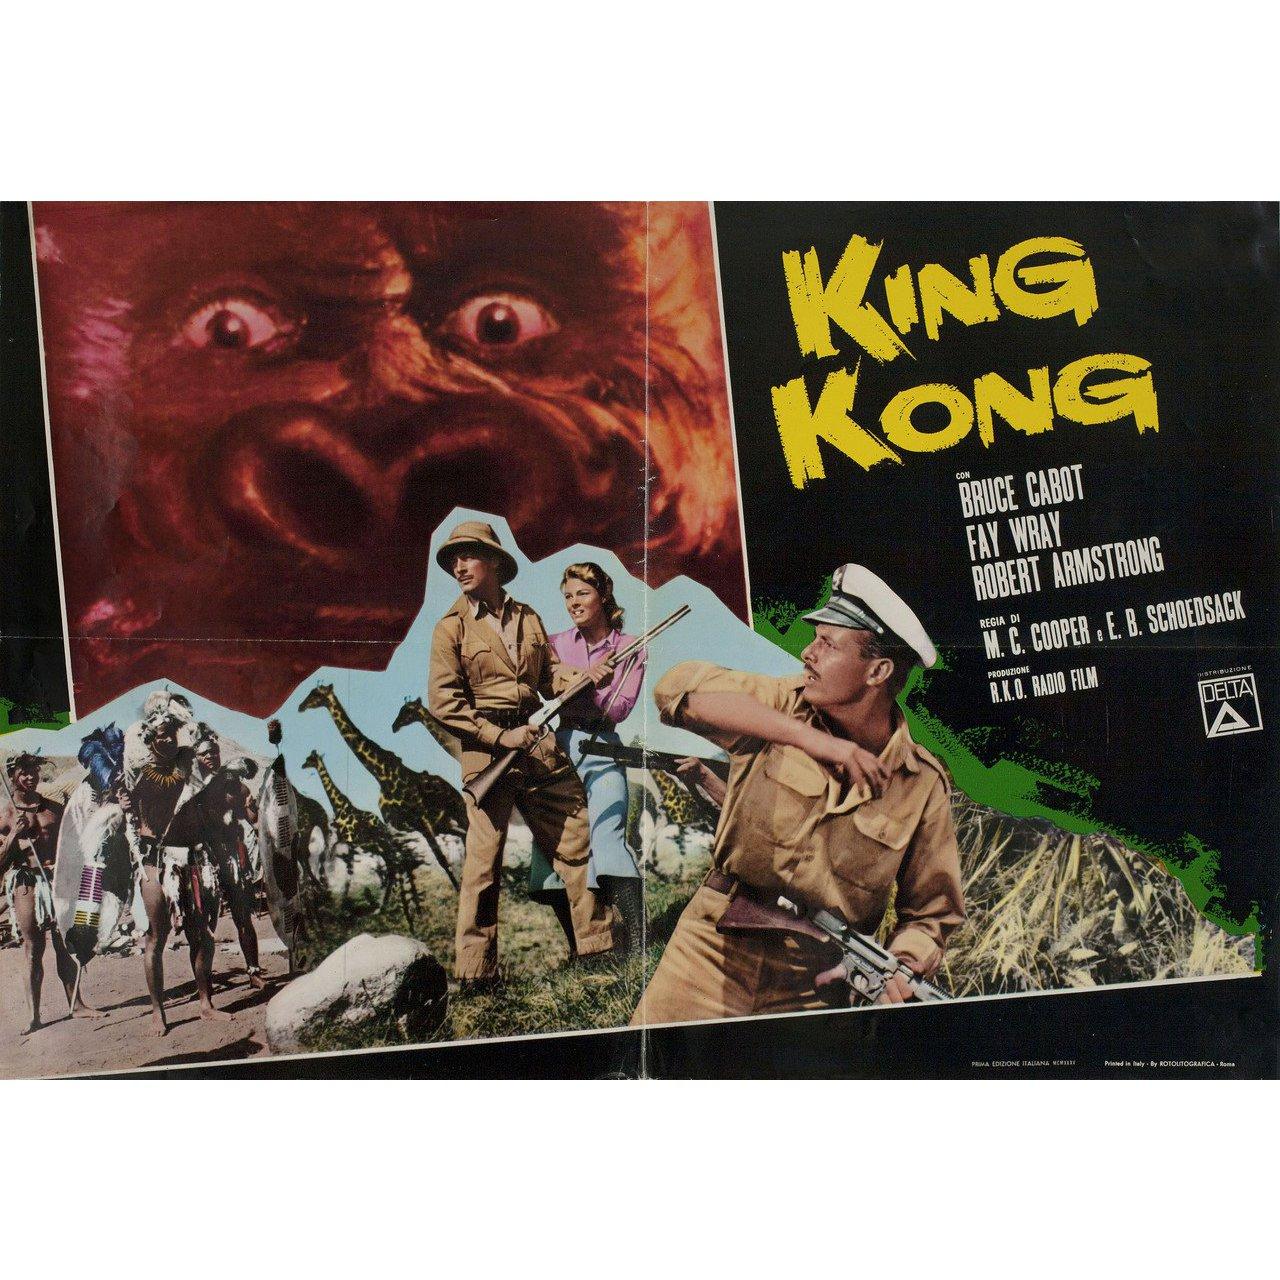 Original 1966 re-release Italian fotobusta poster for the 1933 film King Kong directed by Merian C. Cooper / Ernest B. Schoedsack with Fay Wray / Robert Armstrong / Bruce Cabot / Frank Reicher. Very good-fine condition, folded. Many original posters